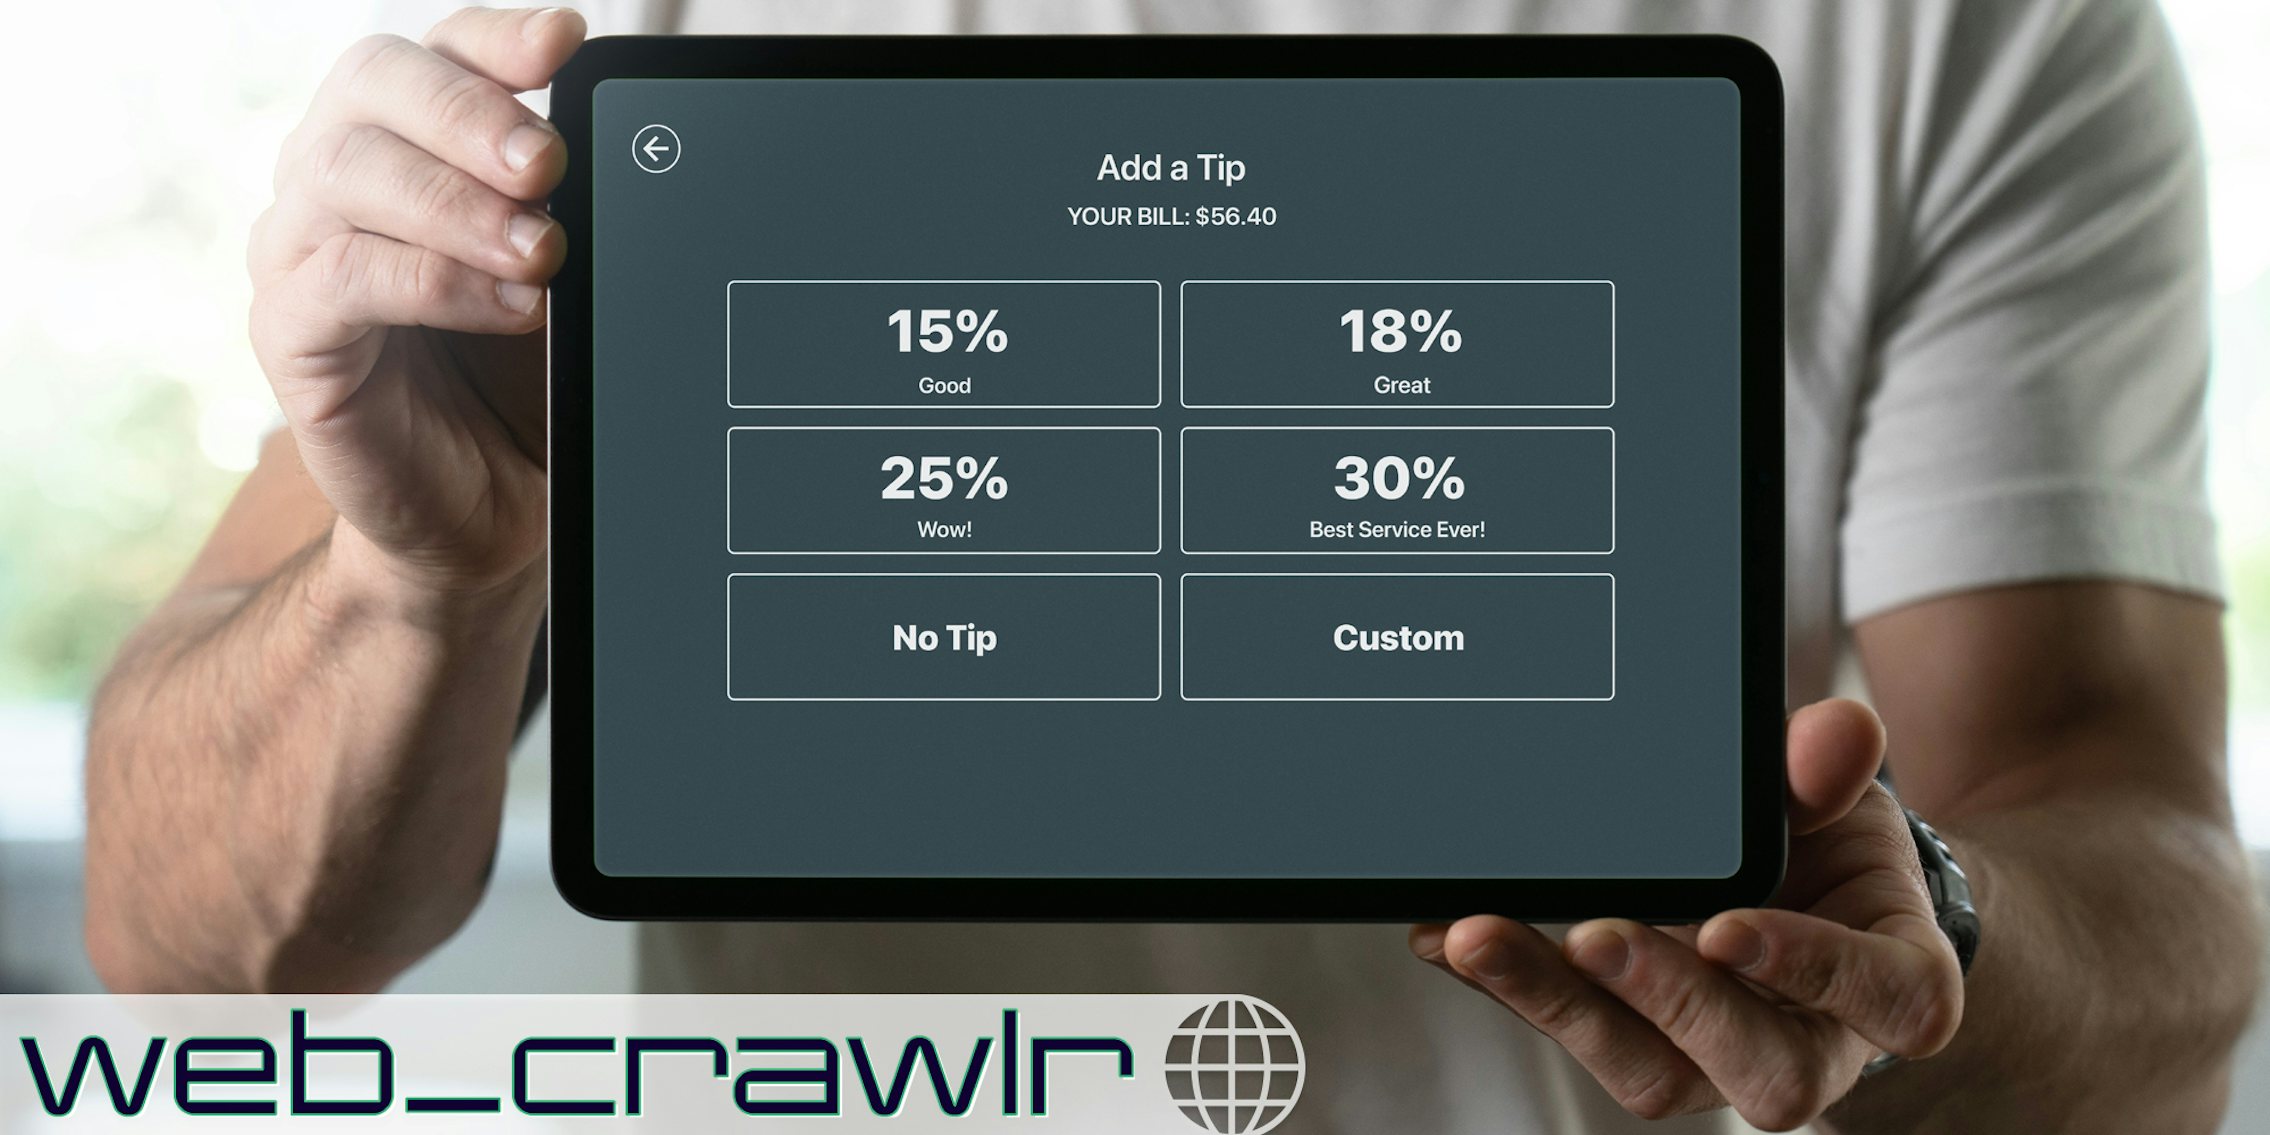 A tablet with options to tip on it. The Daily Dot newsletter web_crawlr logo is in the bottom left corner.